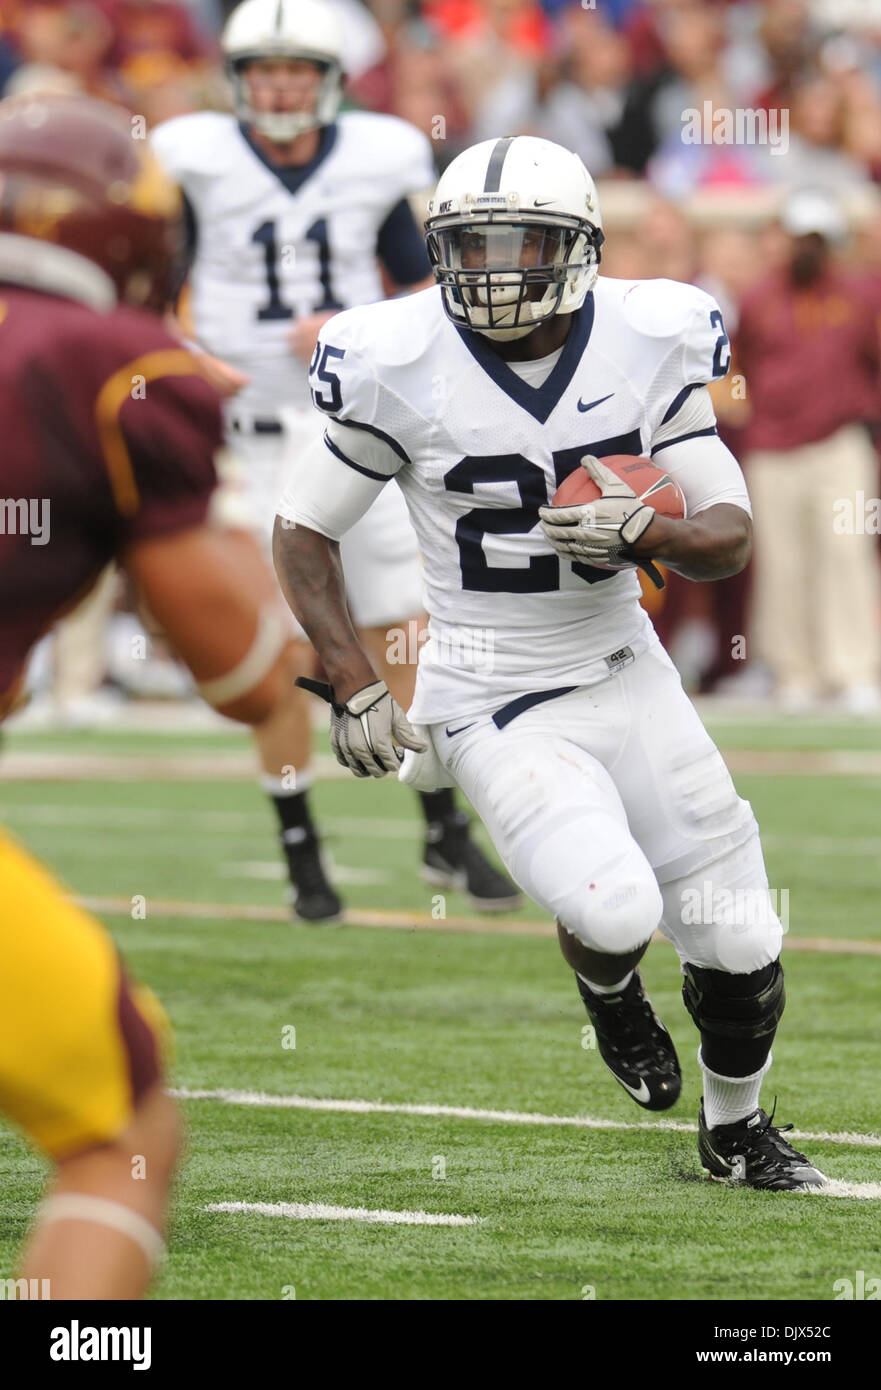 Oct. 23, 2010 - Minneapolis, Minnesota, United States of America - Penn State University tail back Silas Redd (#25) rushes for short  yardage in the fourth quarter of the game between the Minnesota Gophers and the Penn State Nittany Lions at the TCF Stadium in Minneapolis, Minnesota.  Penn State defeats  Minnesota 33-21. (Credit Image: © Marilyn Indahl/Southcreek Global/ZUMApress.c Stock Photo